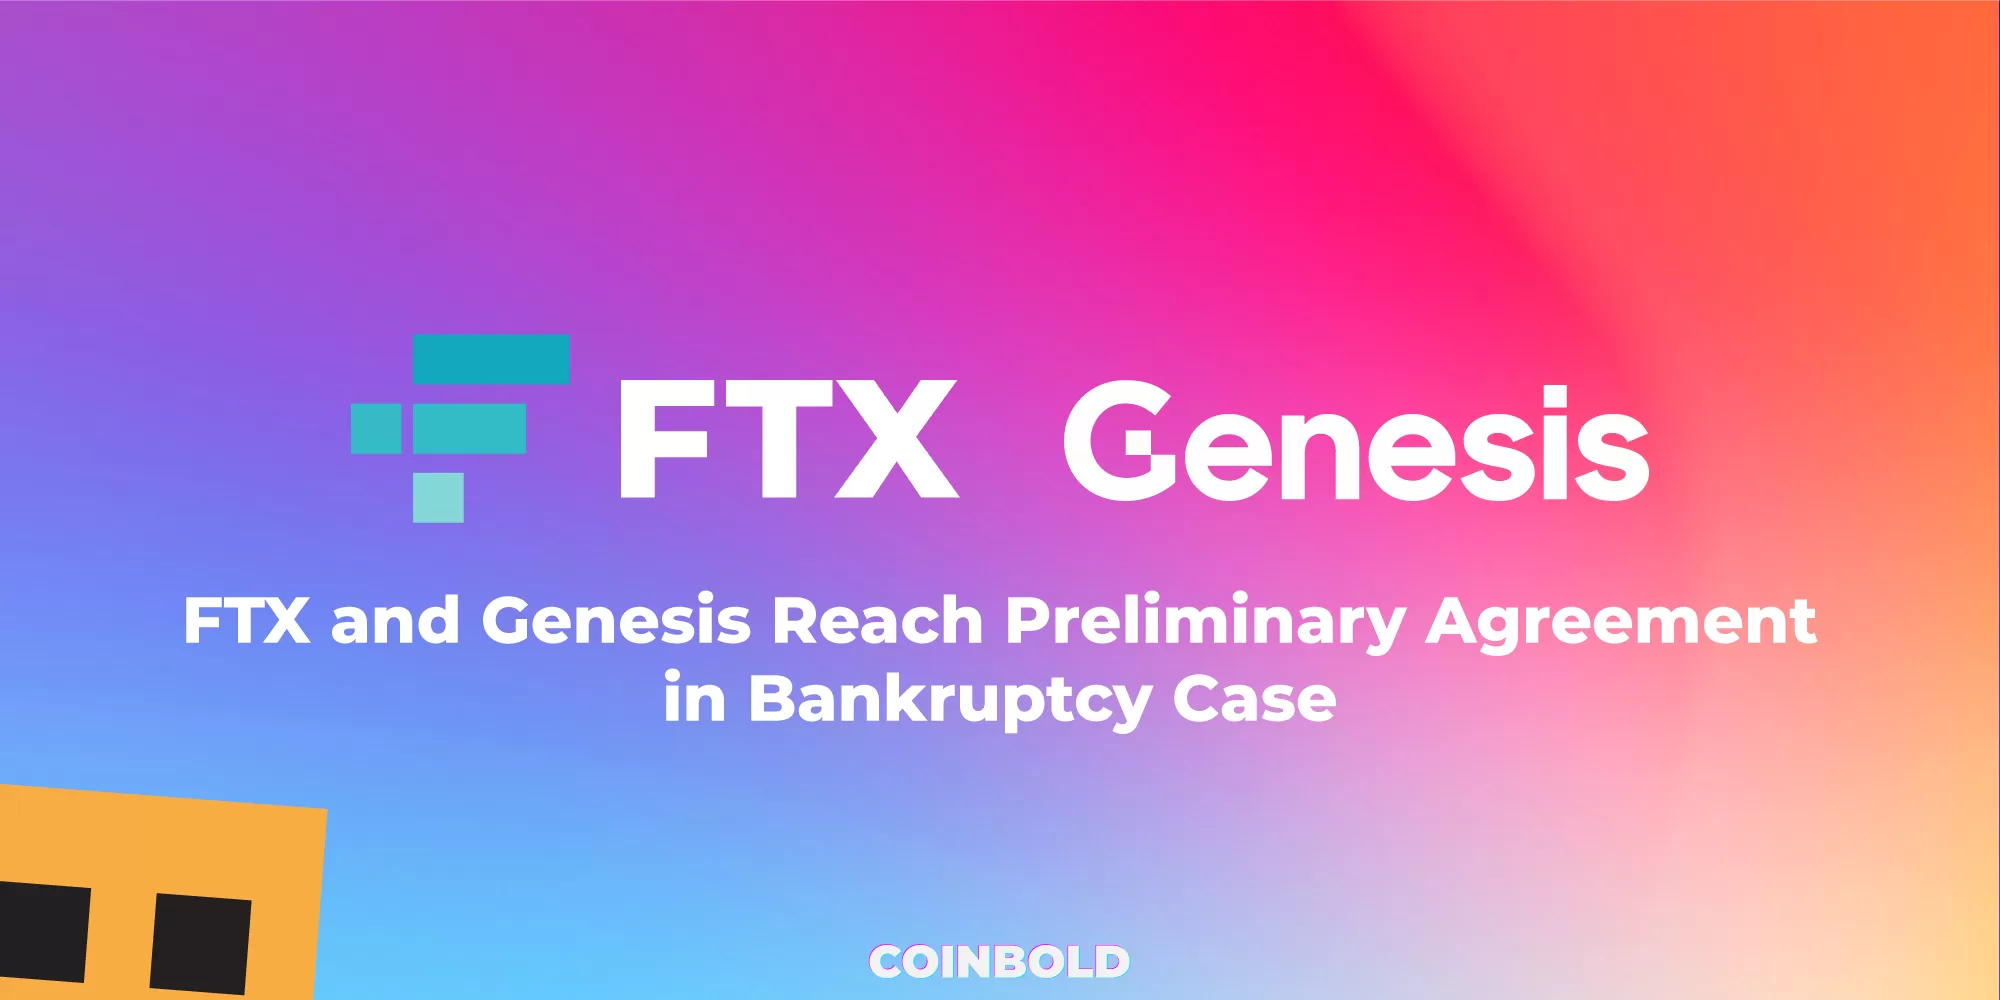 FTX and Genesis Reach Preliminary Agreement in Bankruptcy Case